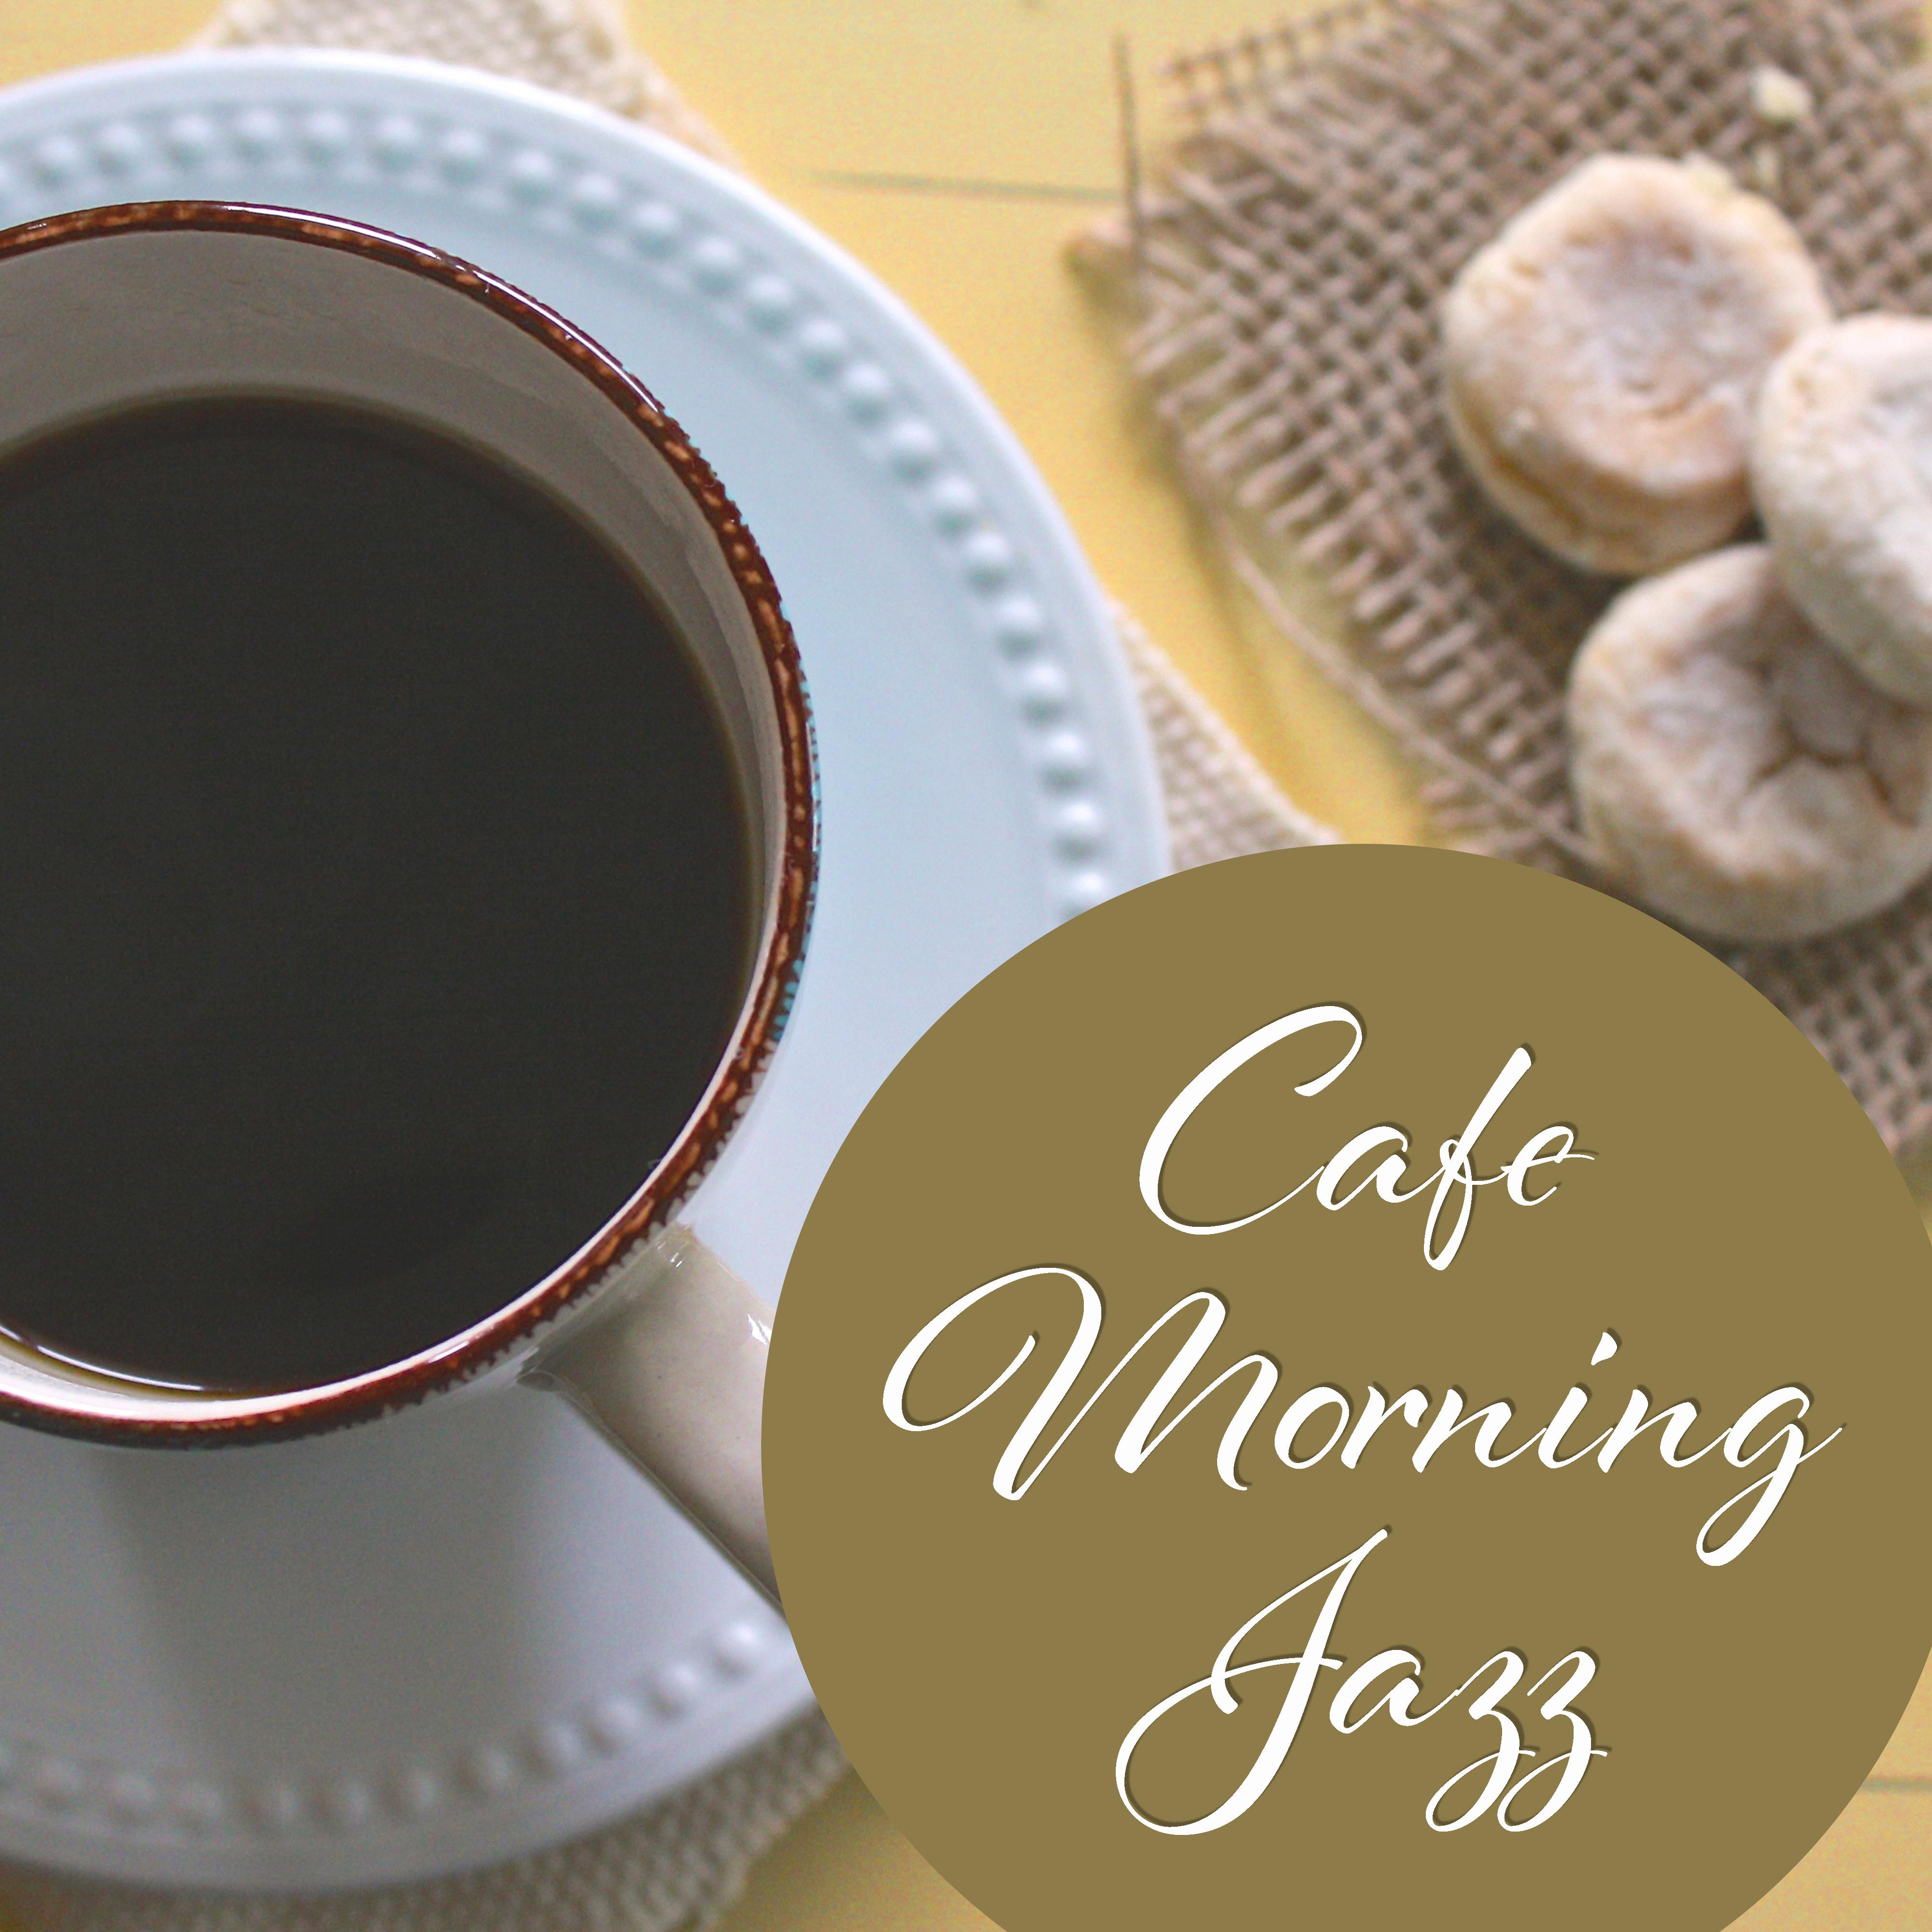 Cafe Morning Jazz  Time to Relax, Stress Relief, Coffee Drinking, Morning Chill with Jazz